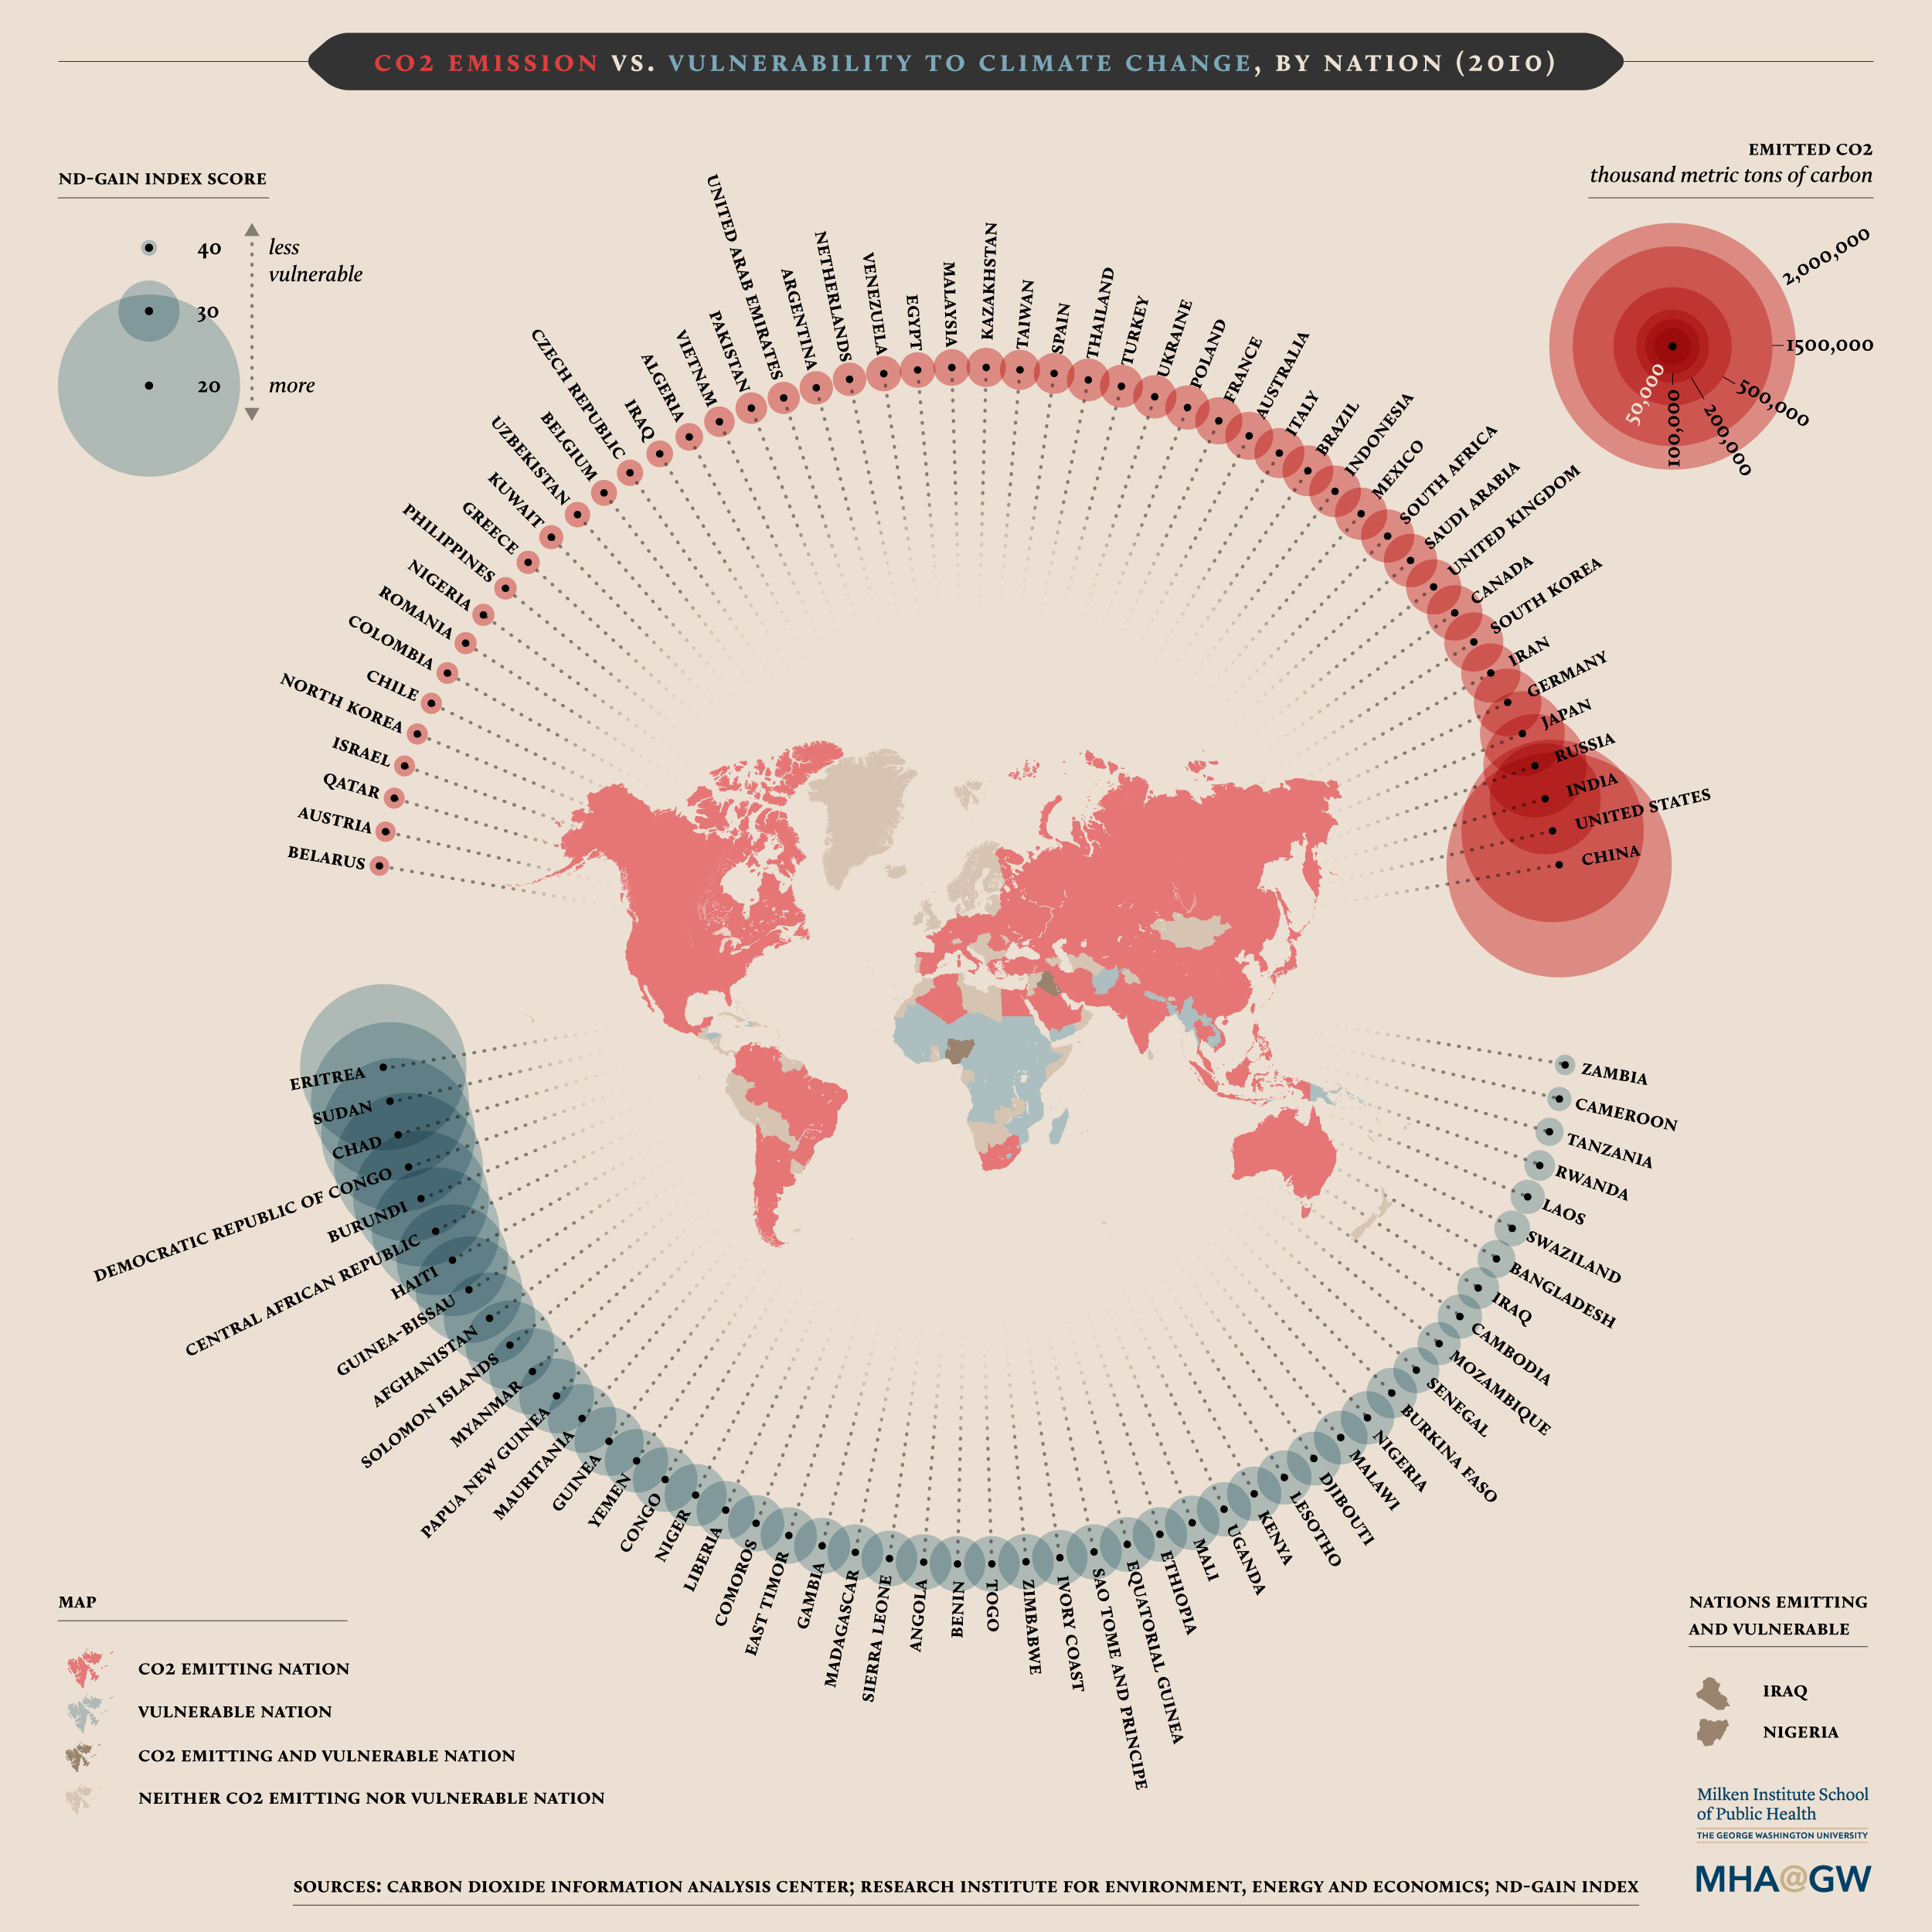 [Graphic] CO2 Emissions v. Vulnerability to Climate Change, by Nation